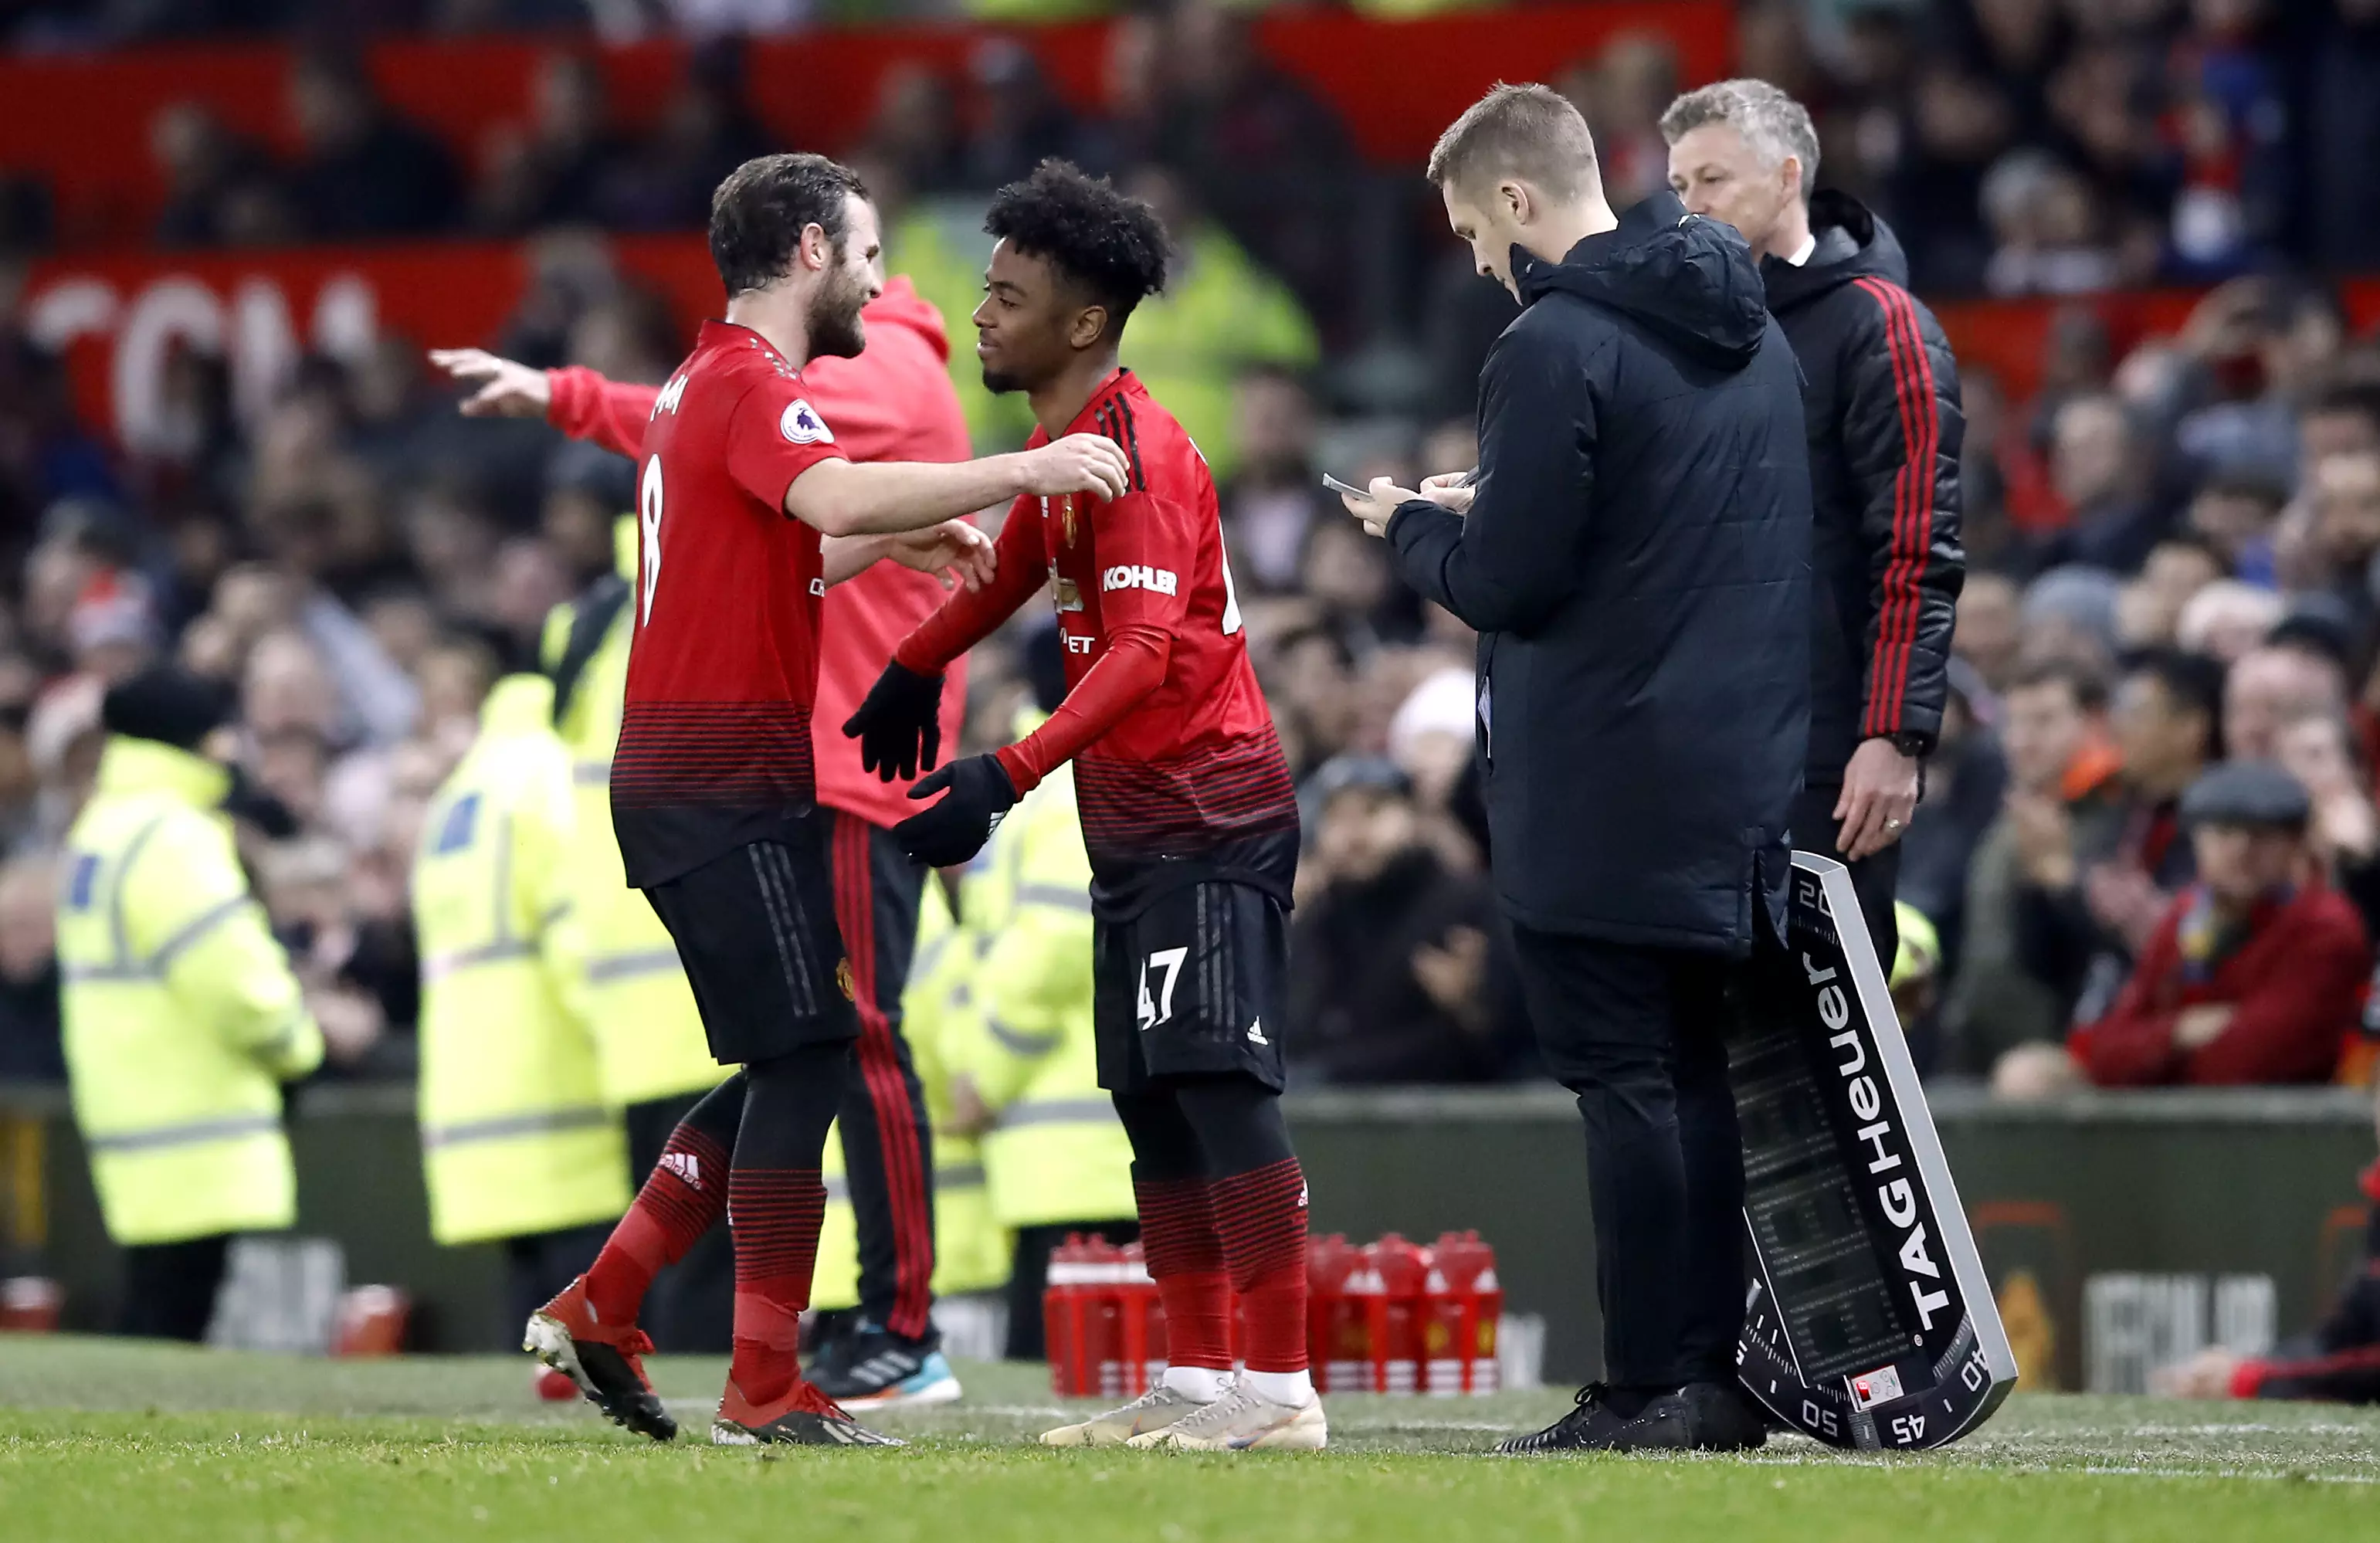 Gomes coming on for Mata earlier this season. Image: PA Images